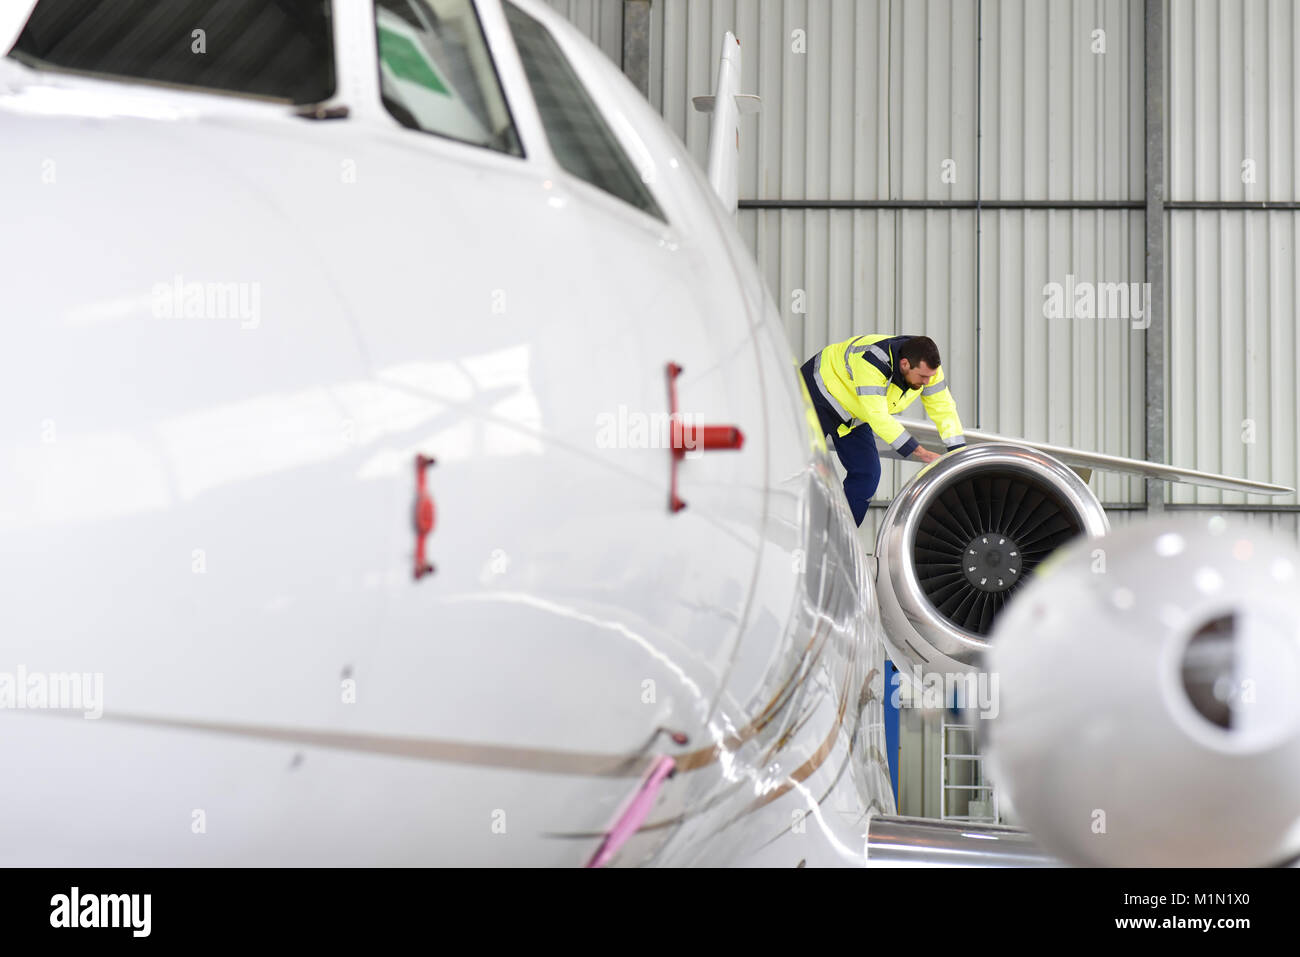 ground staff at the airport checks the technology and safety of a jet in the hangar Stock Photo